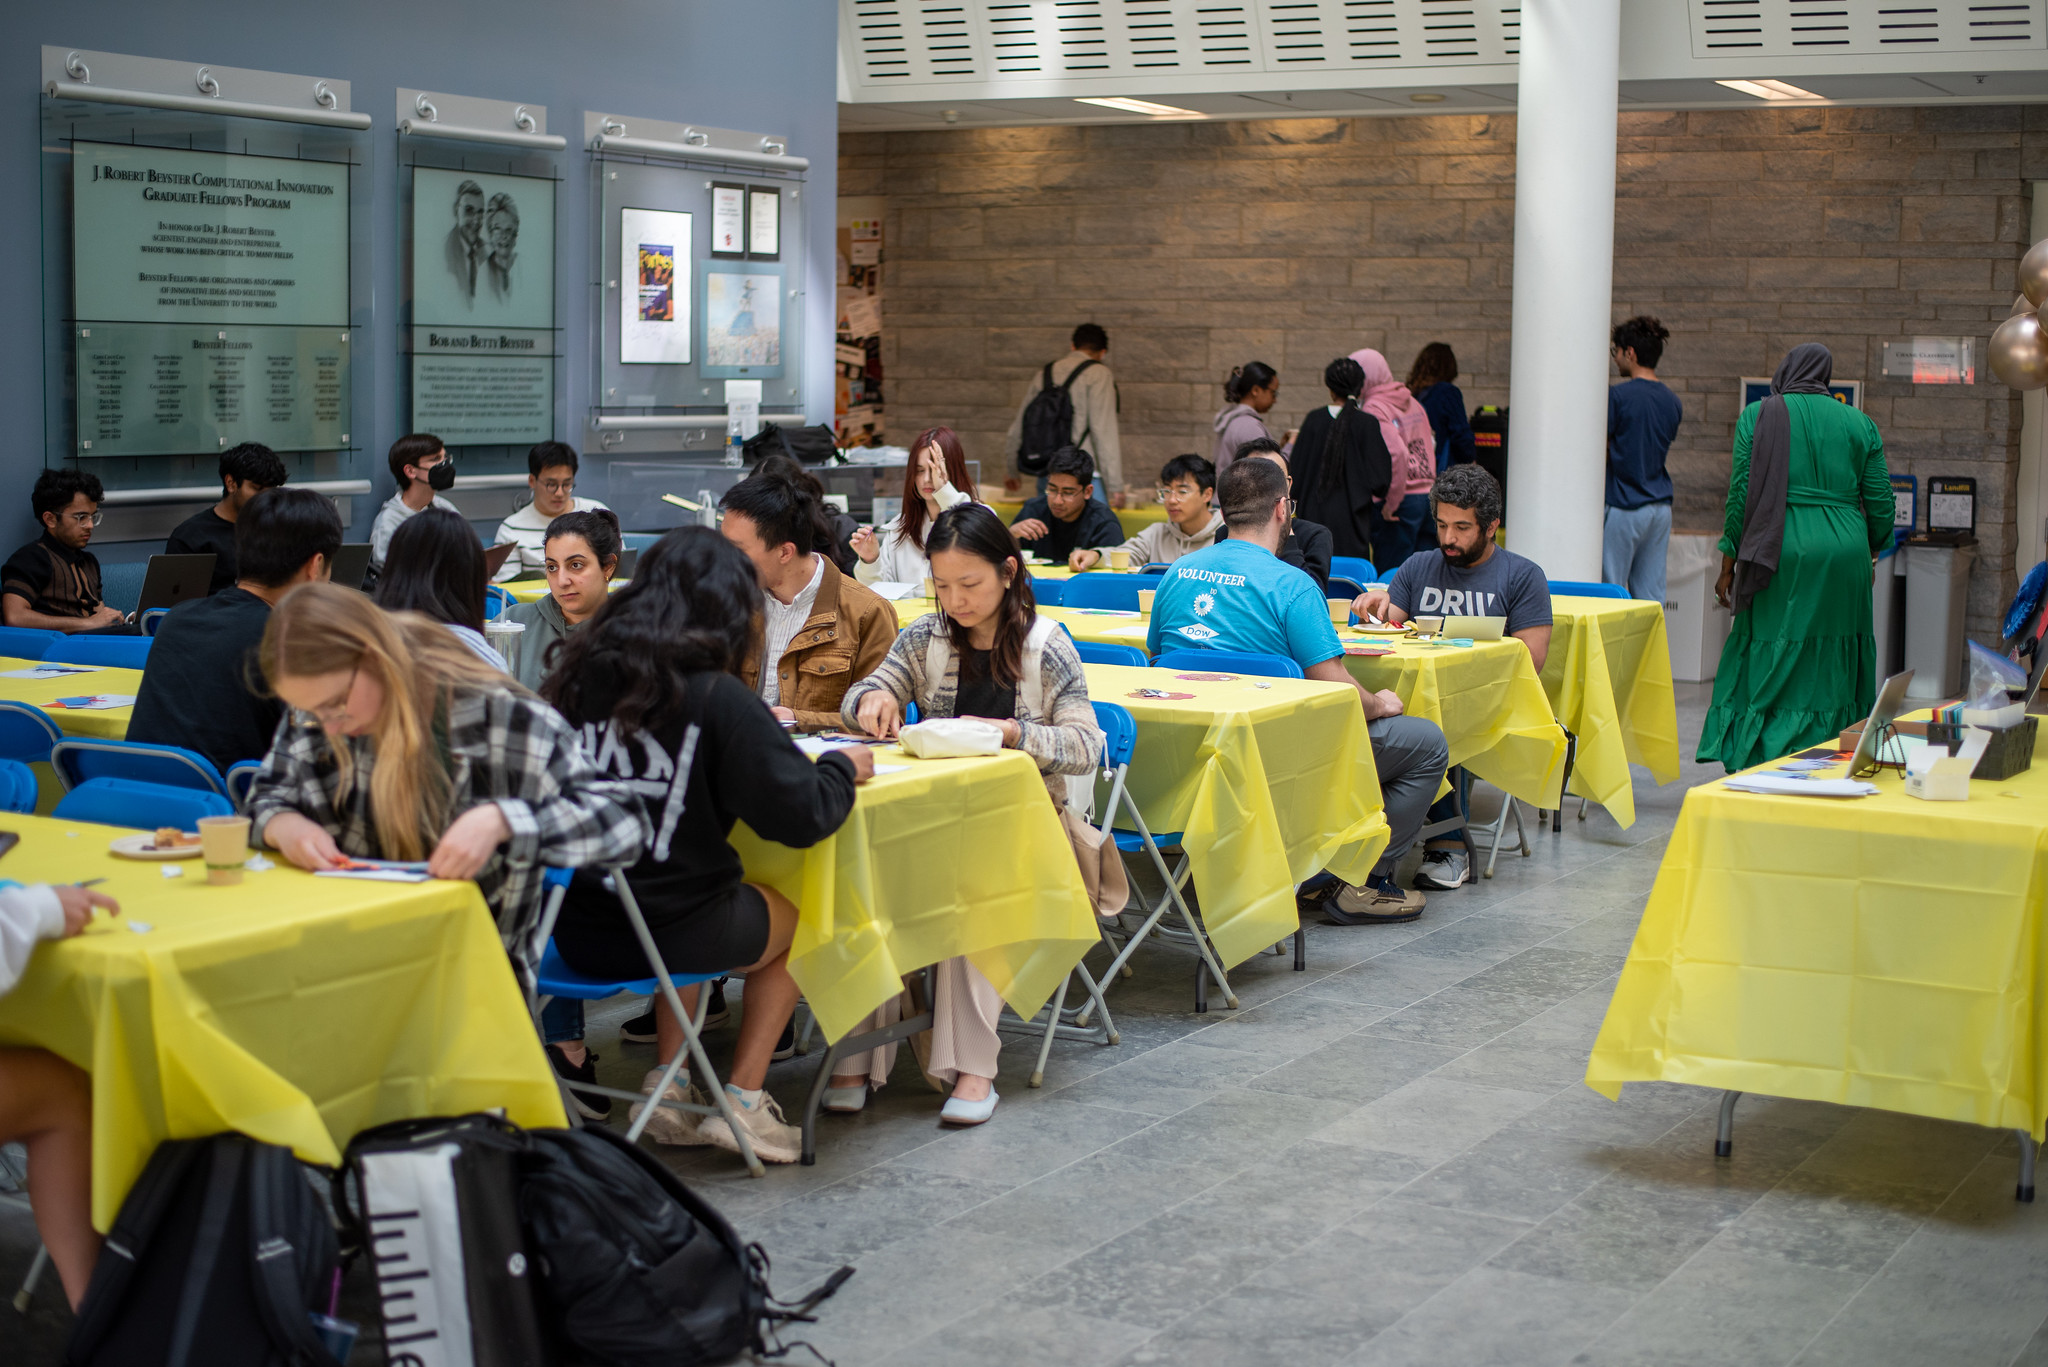 Several long tables with yellow tablecloths. About 20 people are seated at the tables working on crafts and eating snacks.